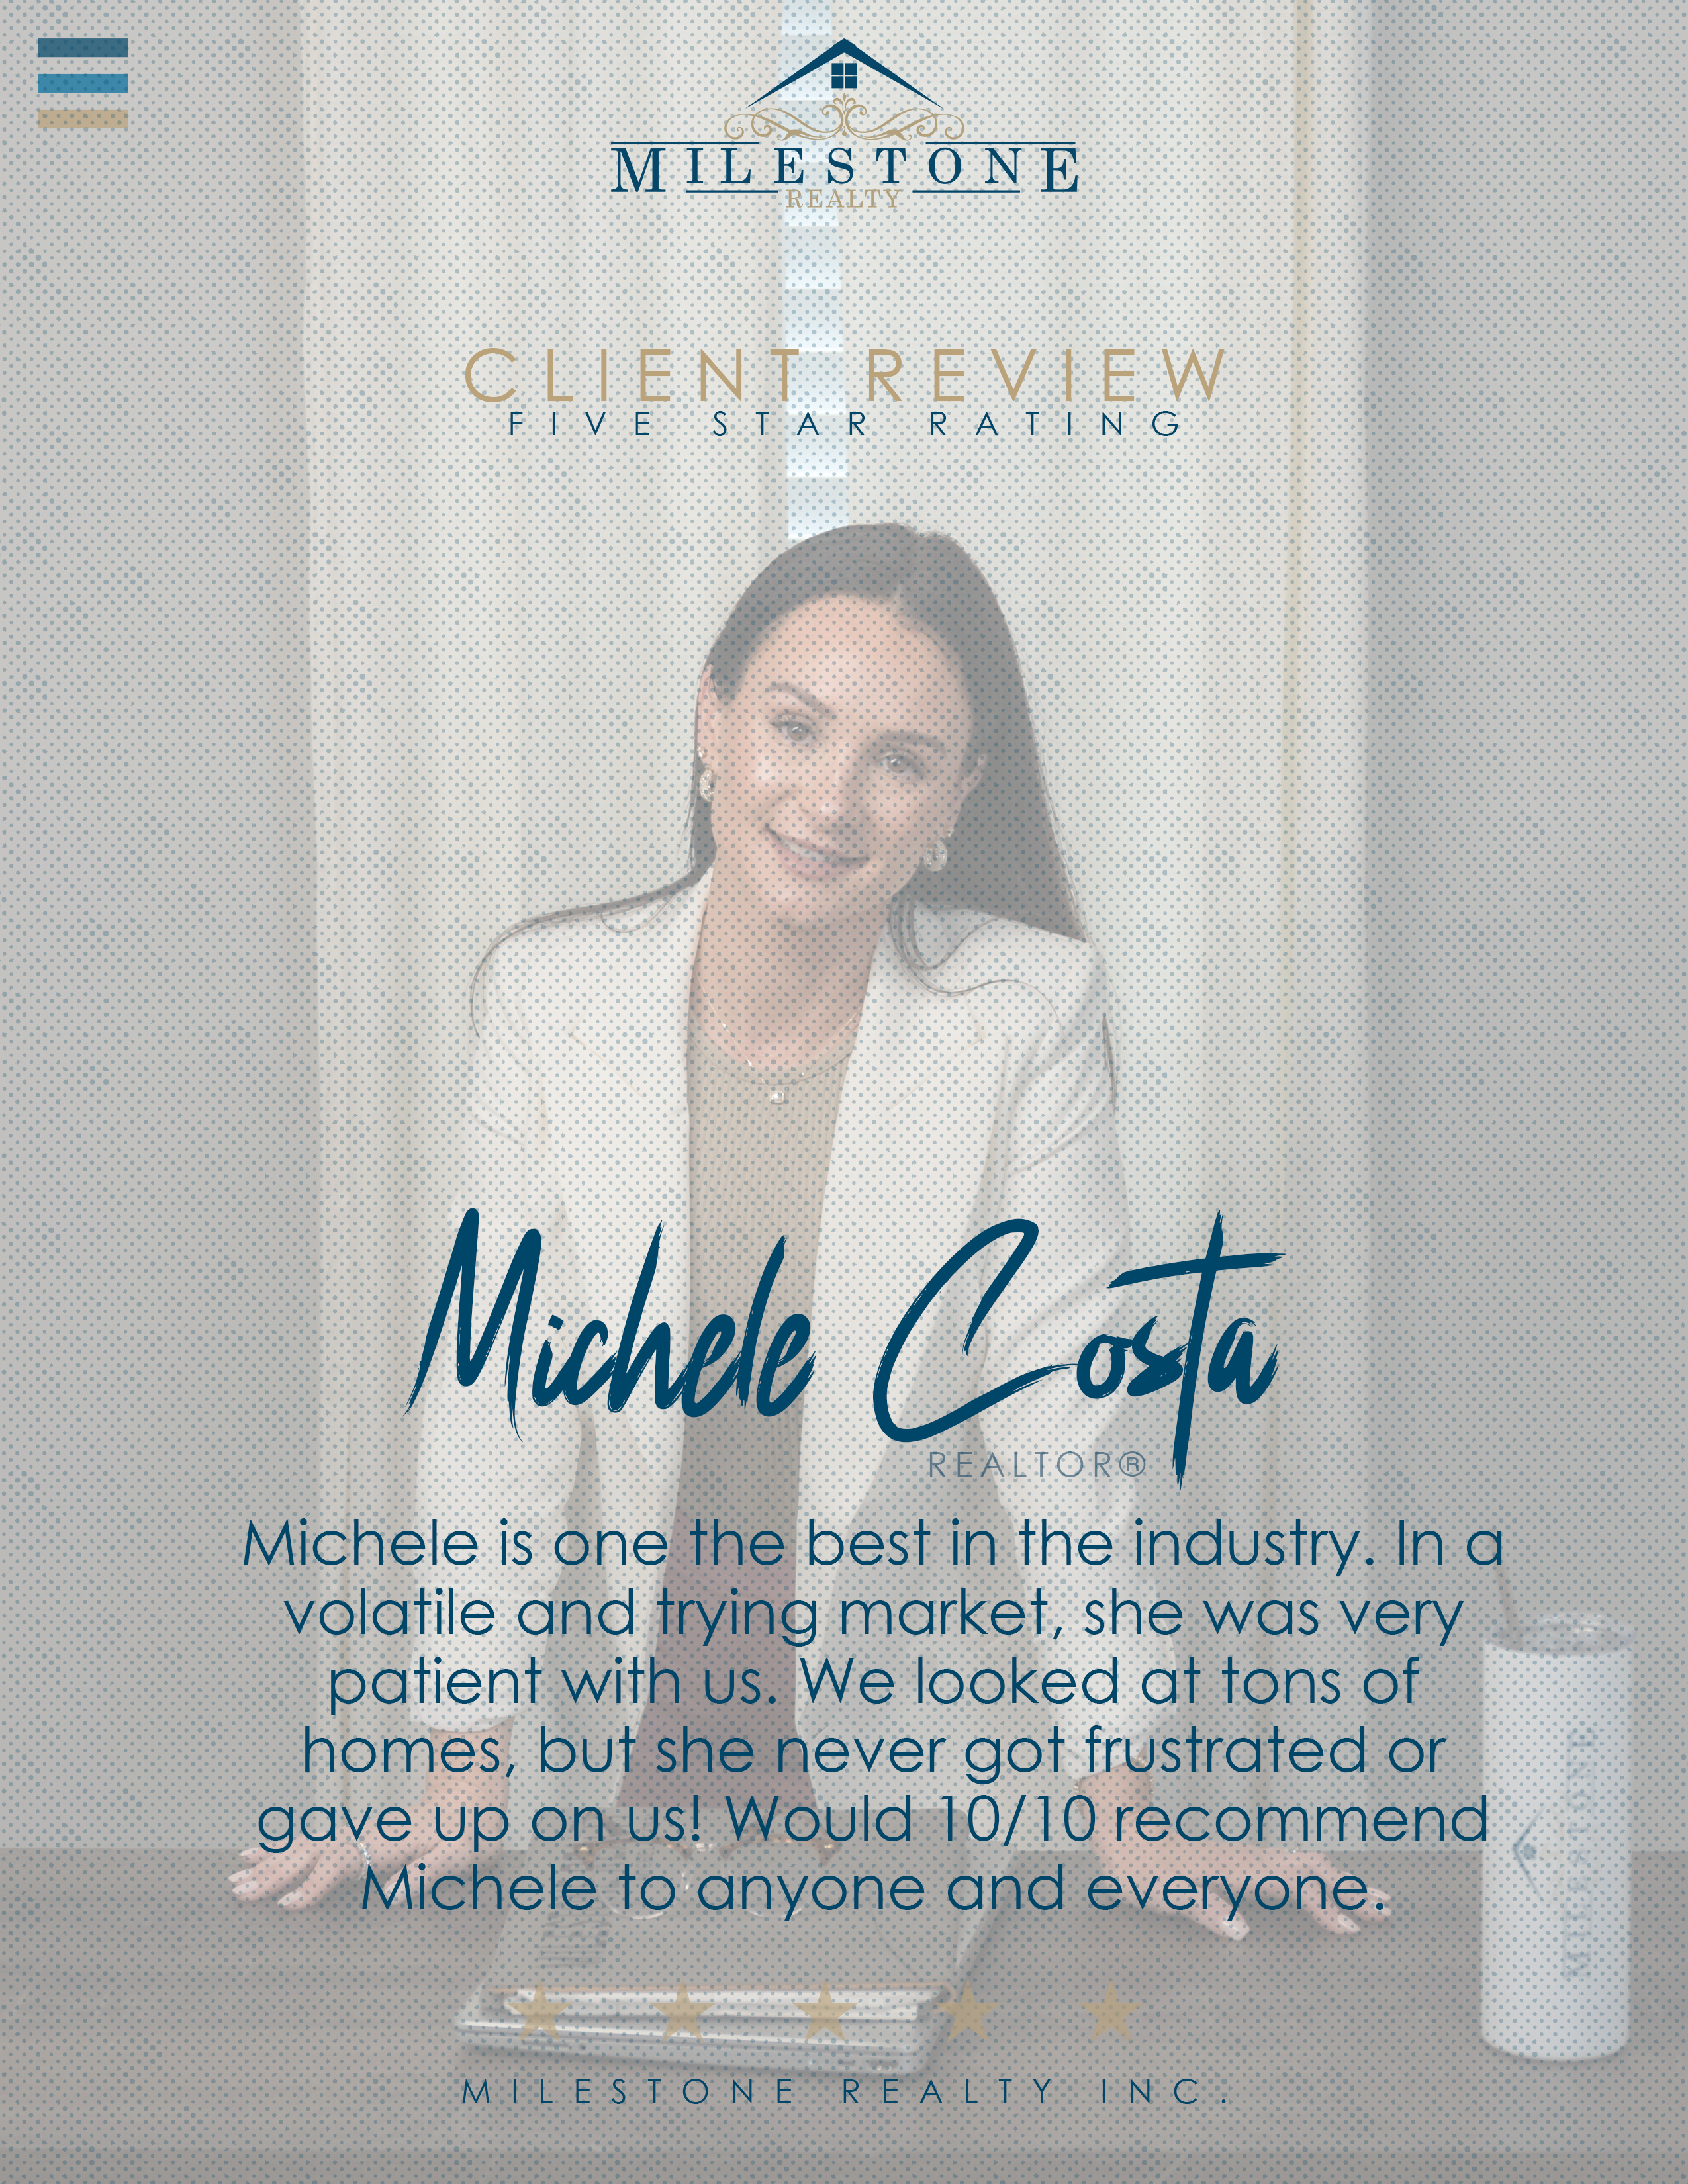 Michele Costa Review